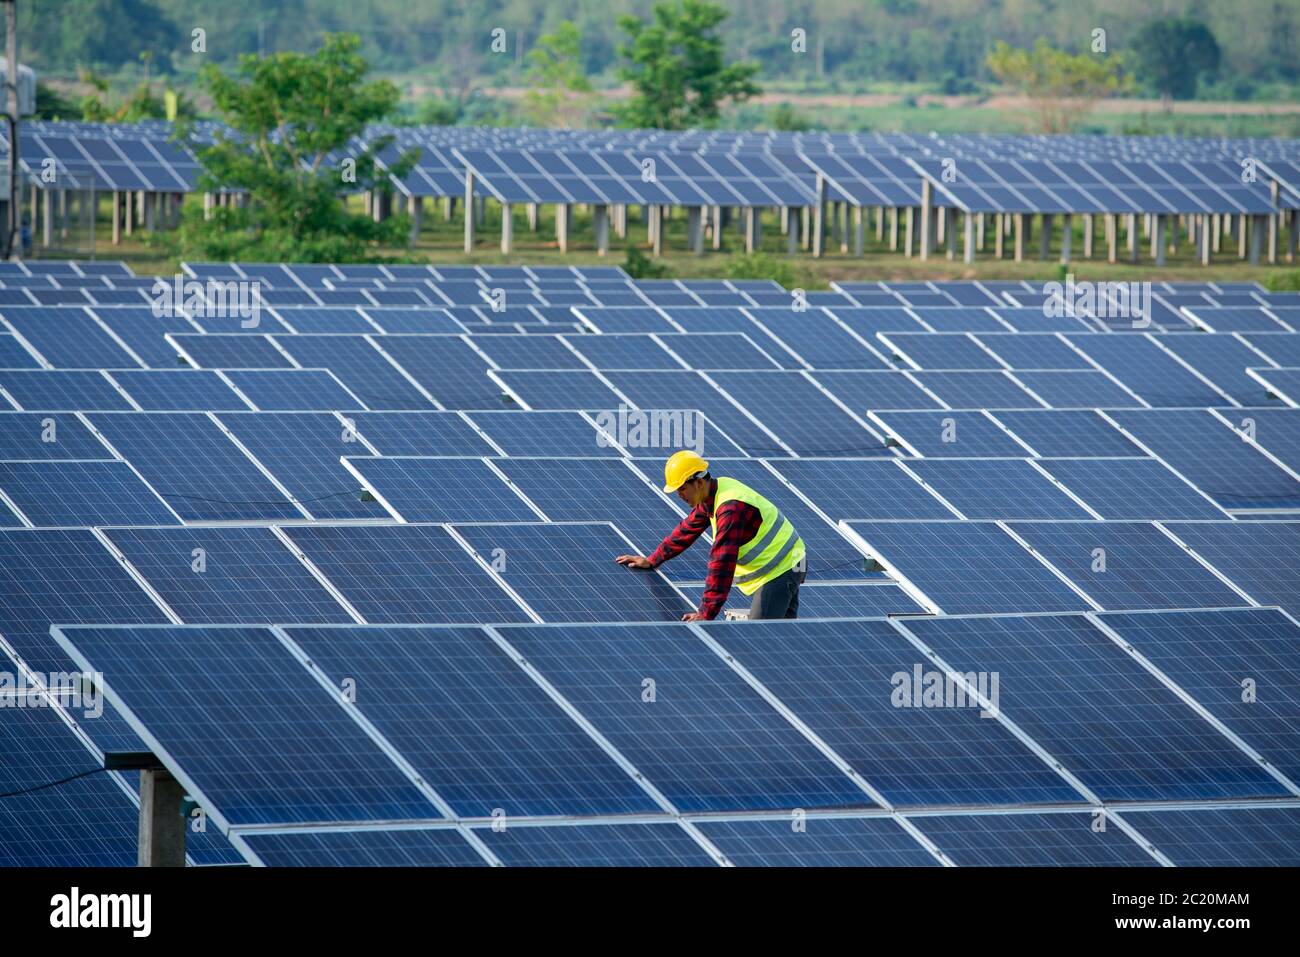 Engineers or operators are checking the solar panel. Stock Photo